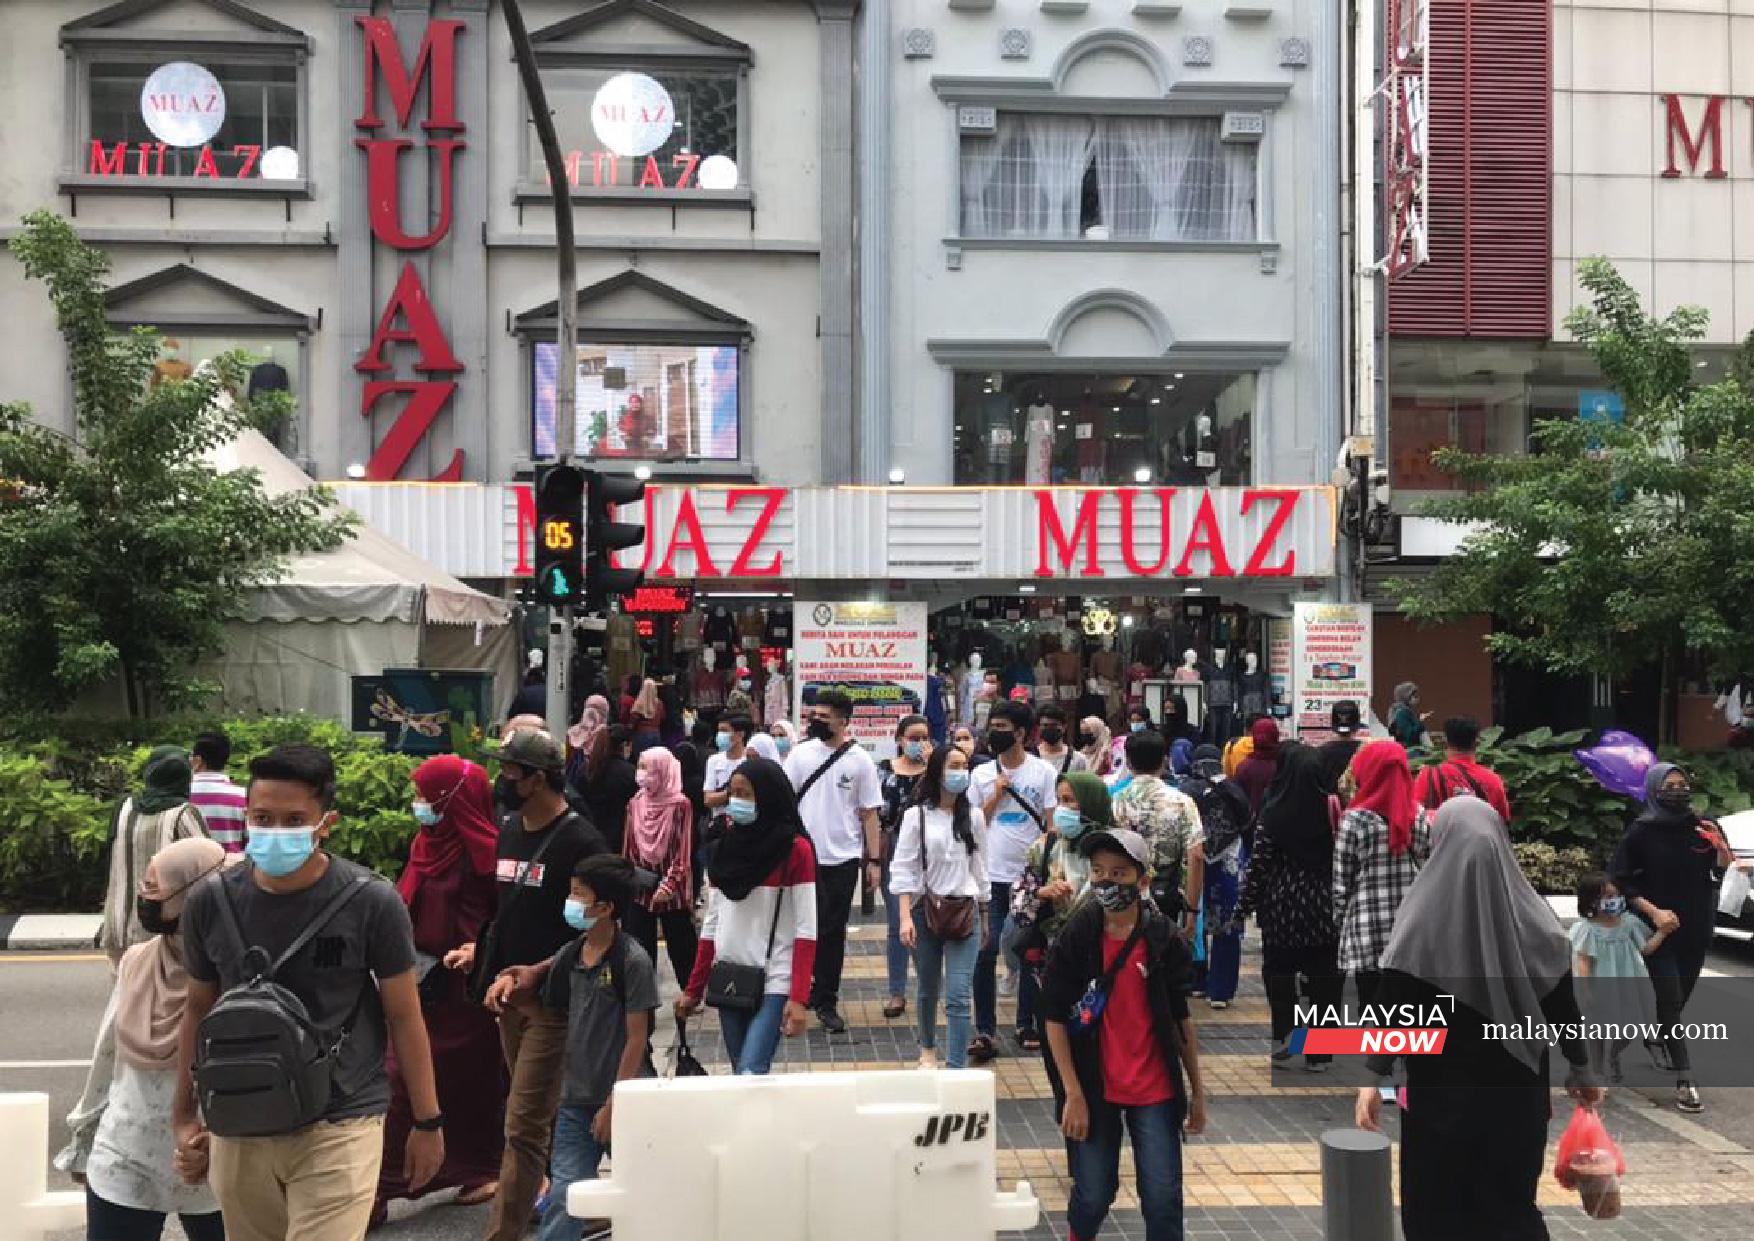 Crowds of people cross the road in front of a popular textile outlet in downtown Kuala Lumpur, as preparations for the Hari Raya celebration gather pace.